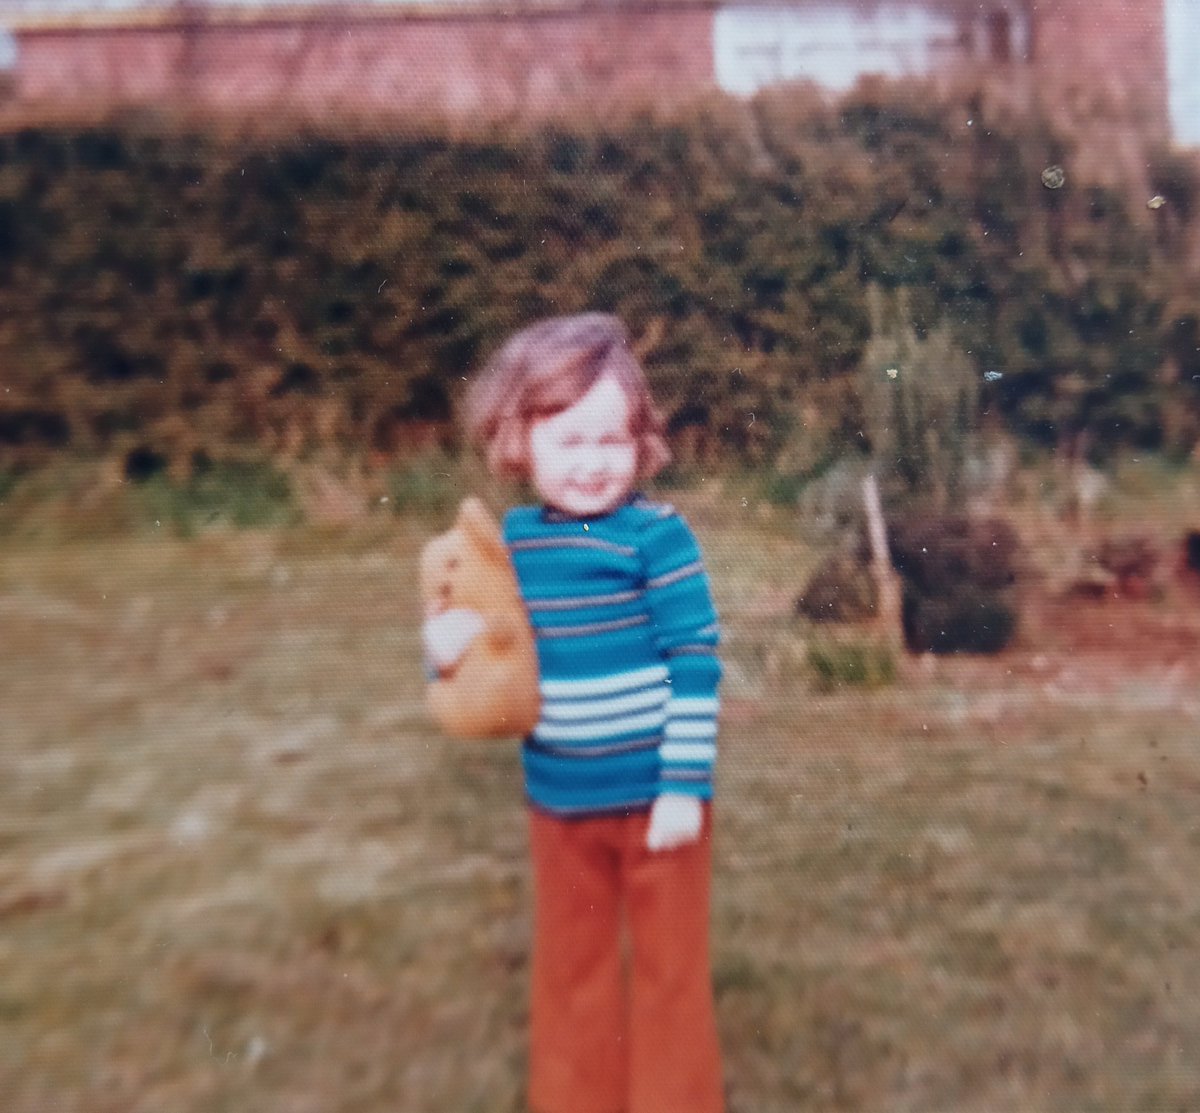 #T.B.T I used to love that odd looking bear thing. It had no nose and was called 'Sniffy' Particularly think the russet flares with hooped polyester jumper was quite the daring paring . Have a charming day xx